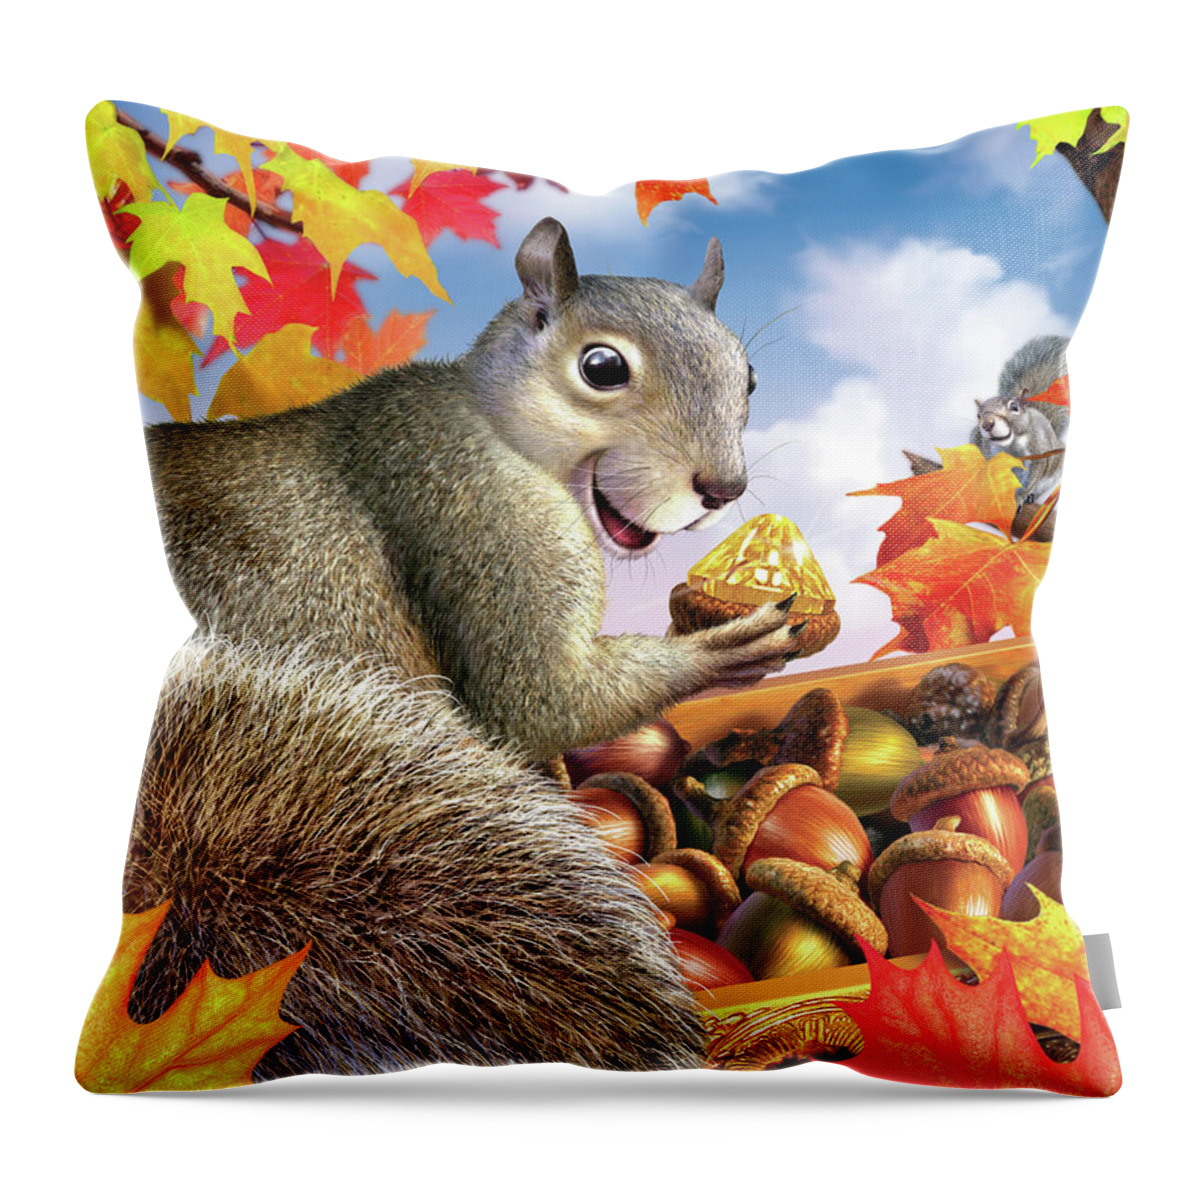 Squirrel Throw Pillow featuring the digital art Squirrel Treasure by Jerry LoFaro